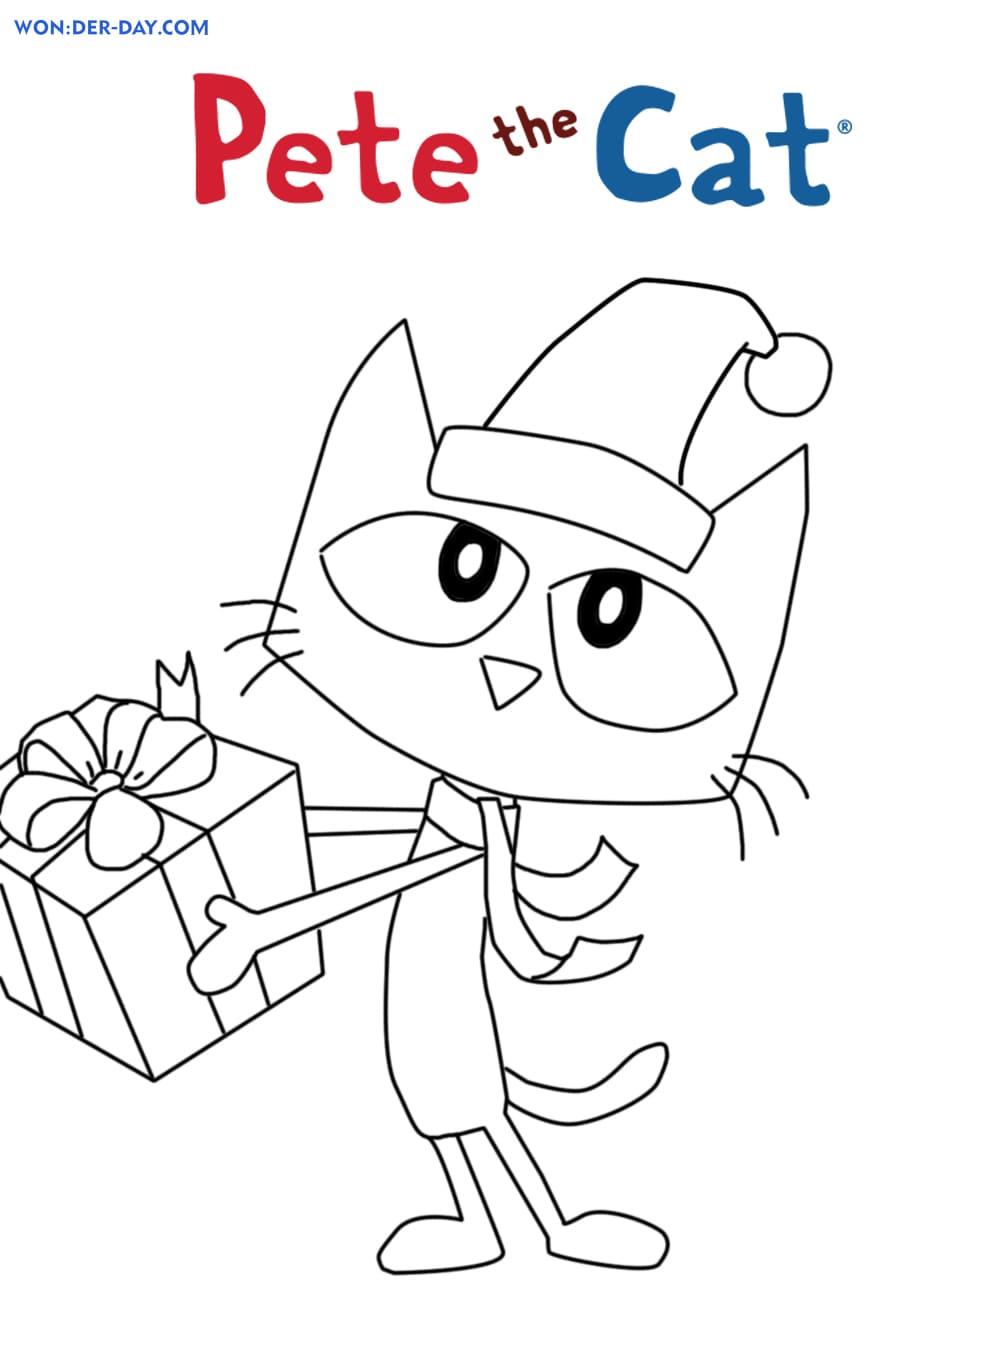 pete-the-cat-coloring-pages-printable